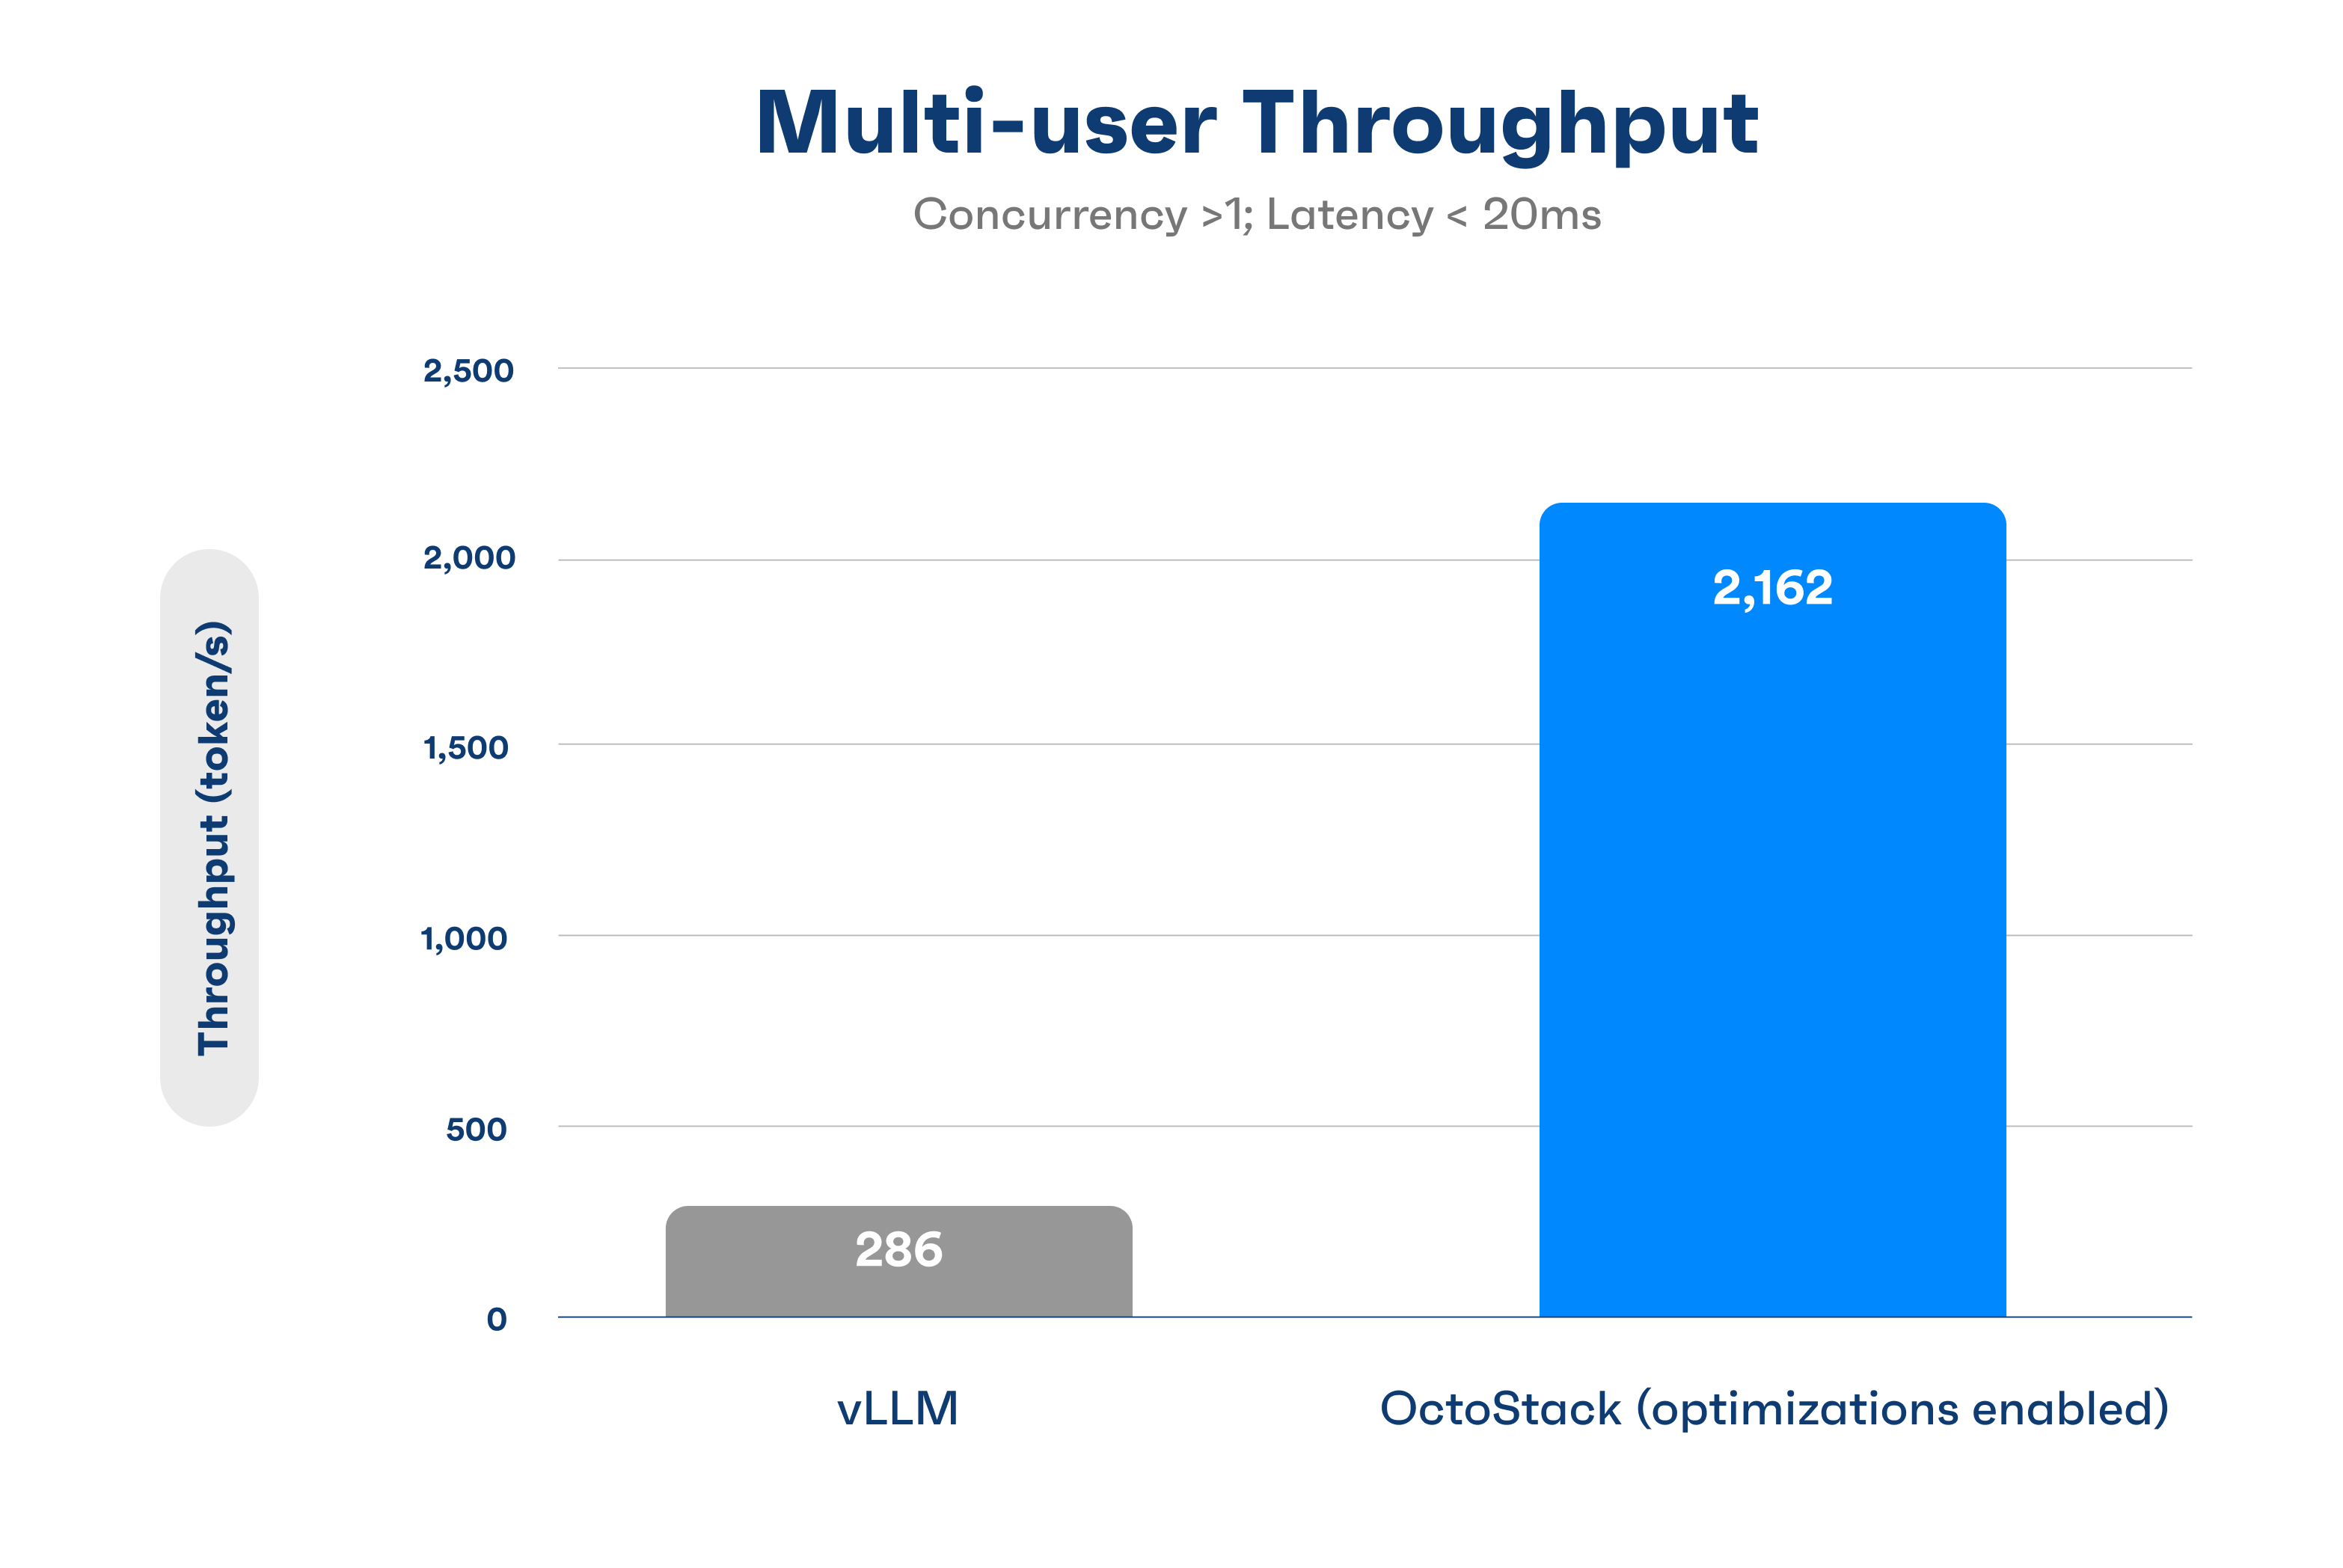 Multi-user Throughput of vLLM compared to OctoStack chart